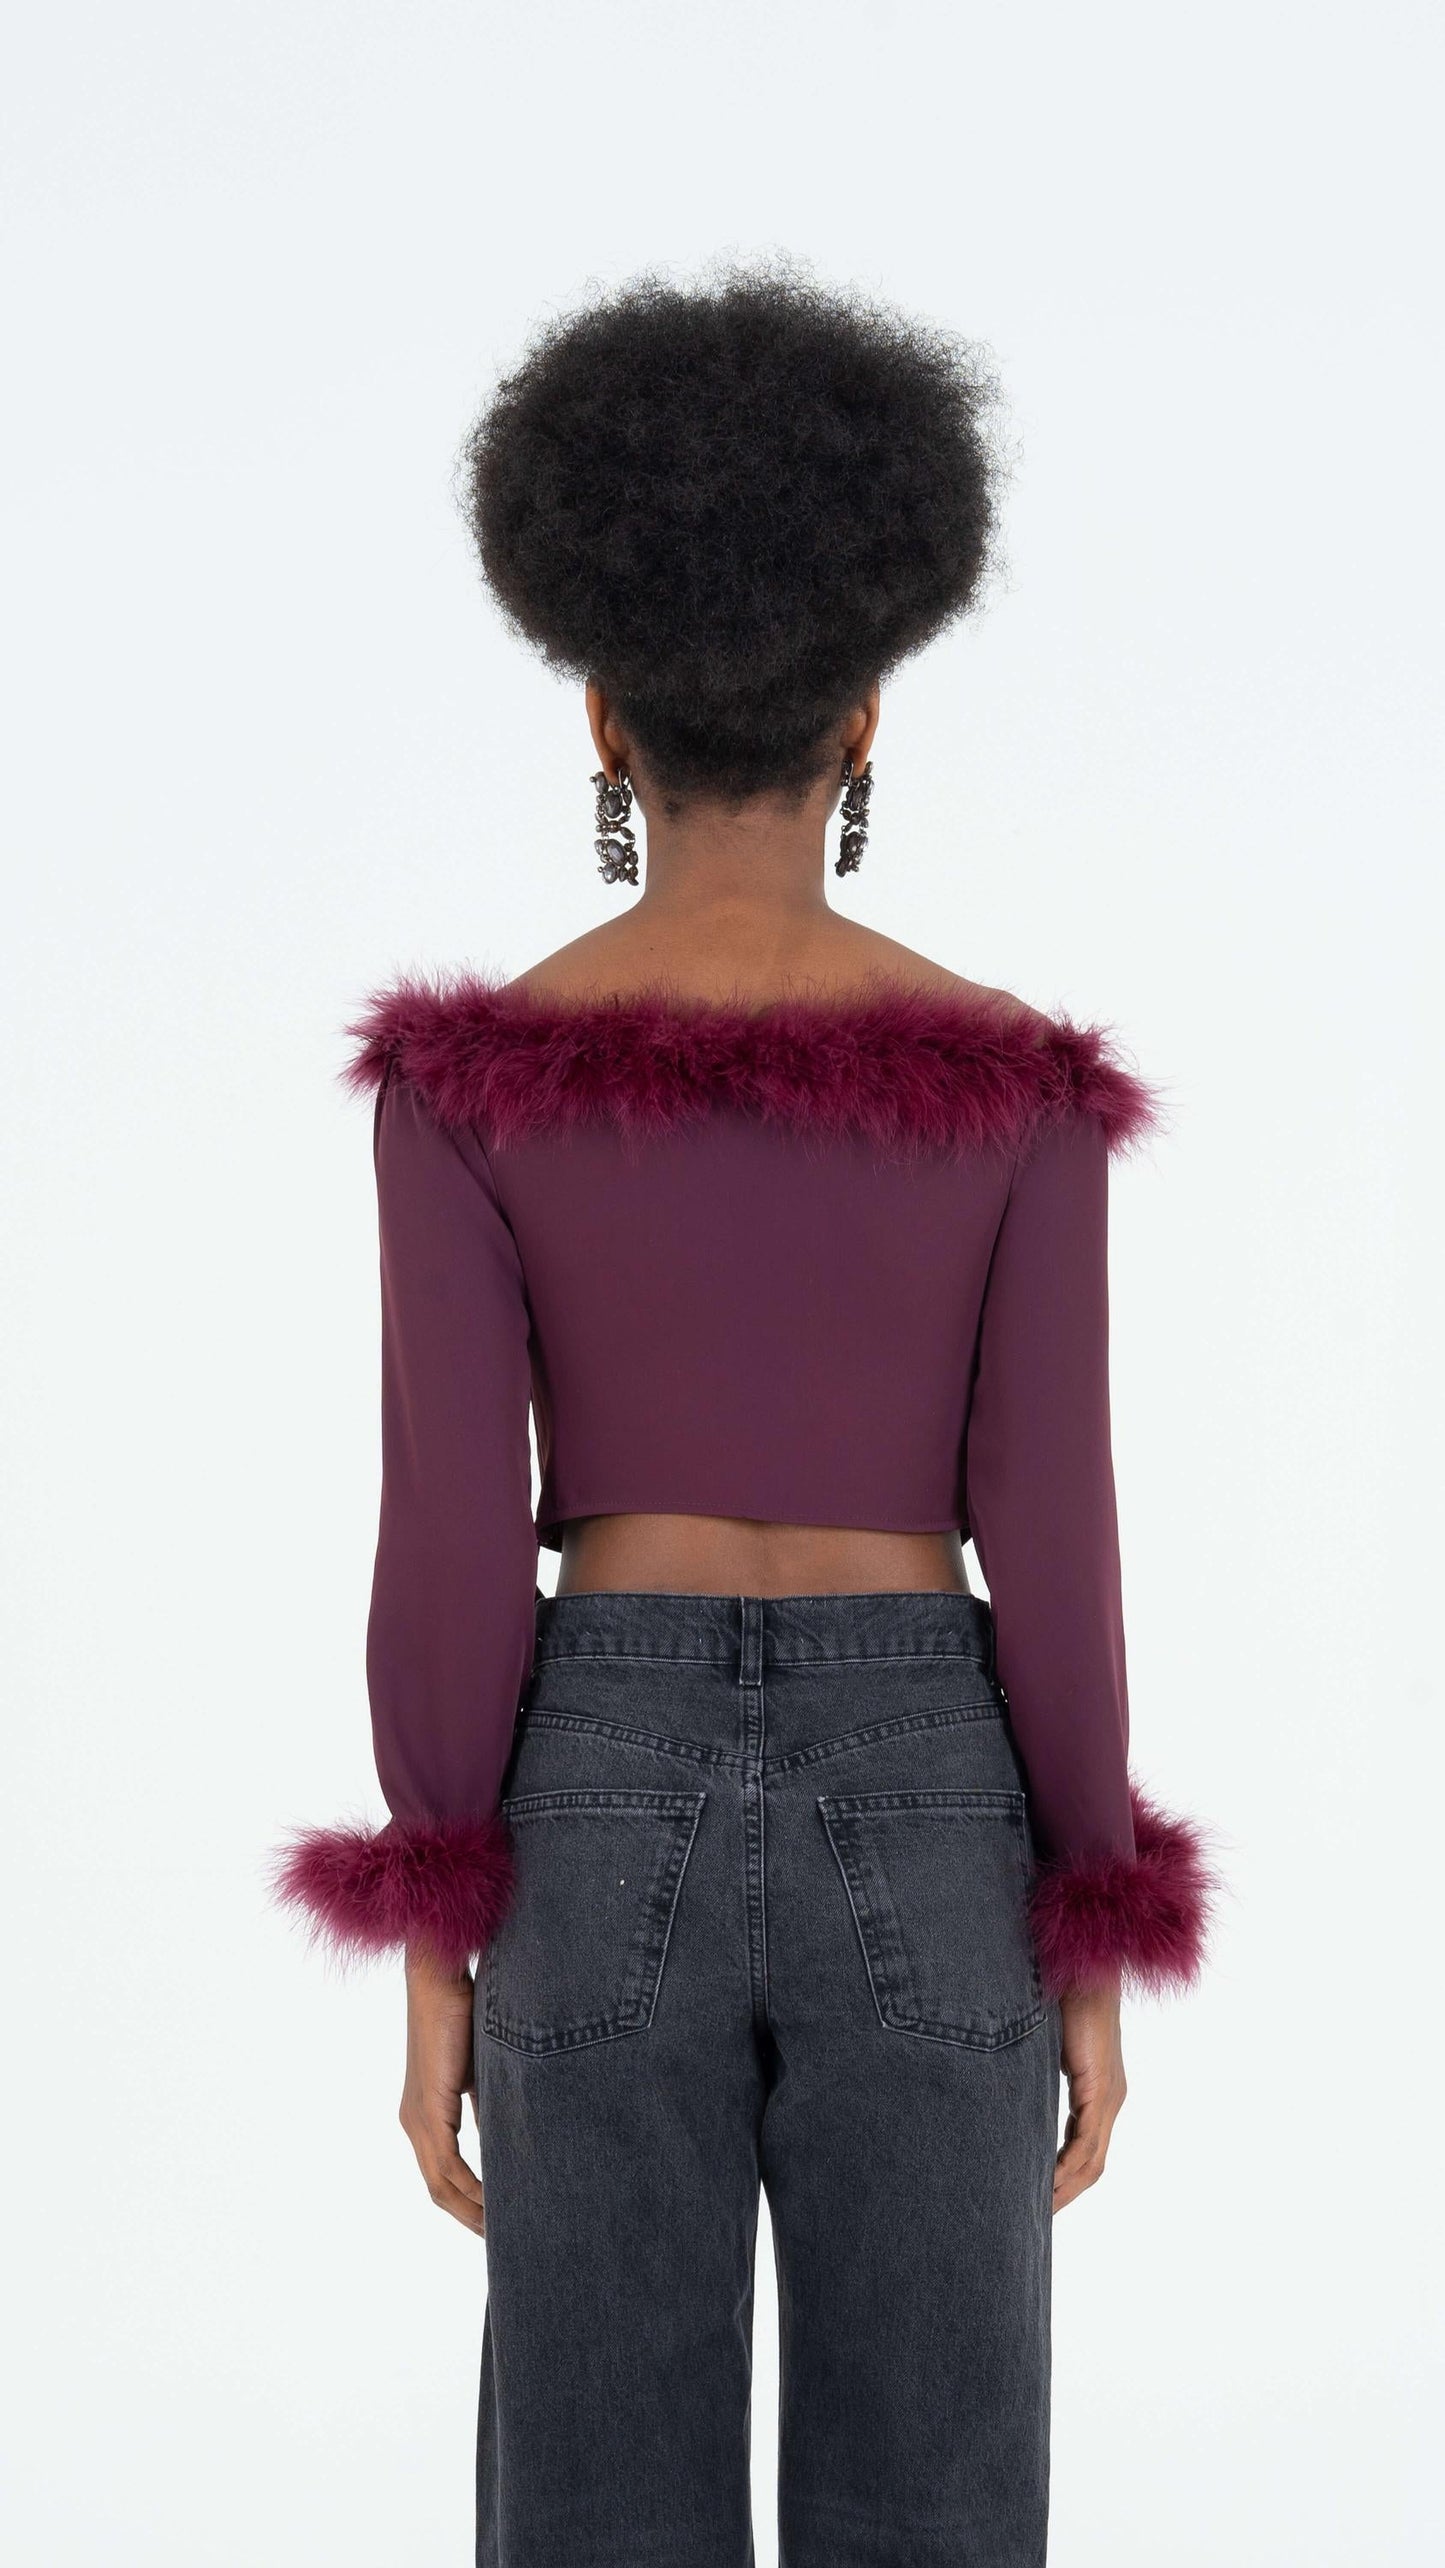 Feather burgundy top